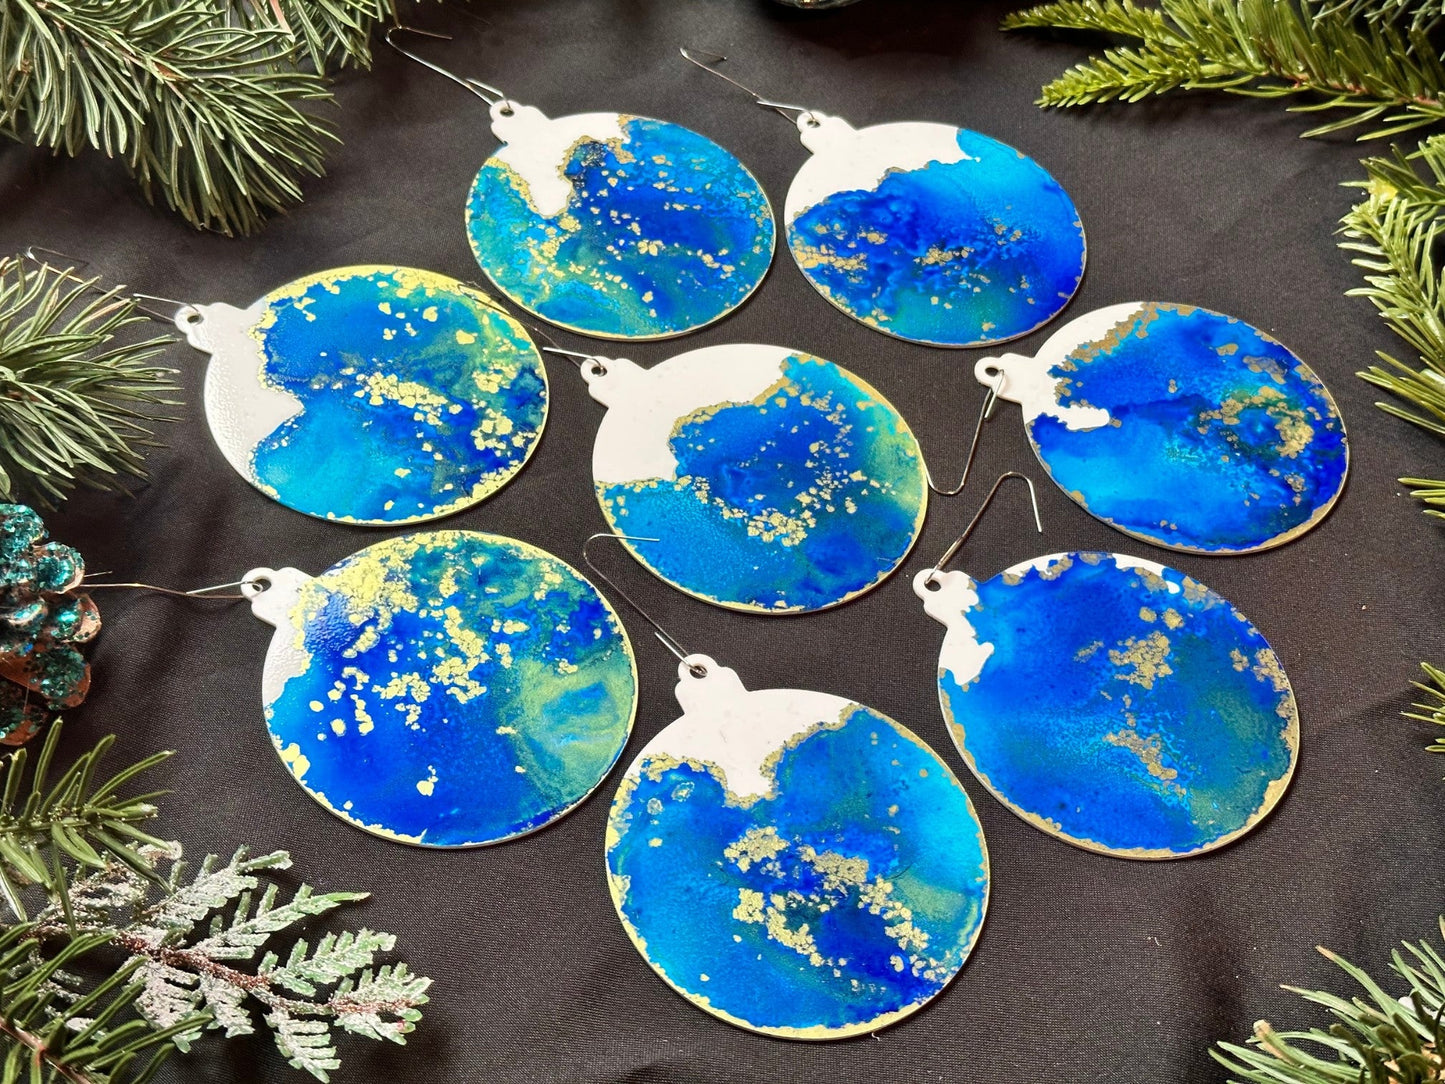 Caribbean Blue and Gold Inks Hand-Painted Ornaments - Set of 8 - Driftless Enchantments